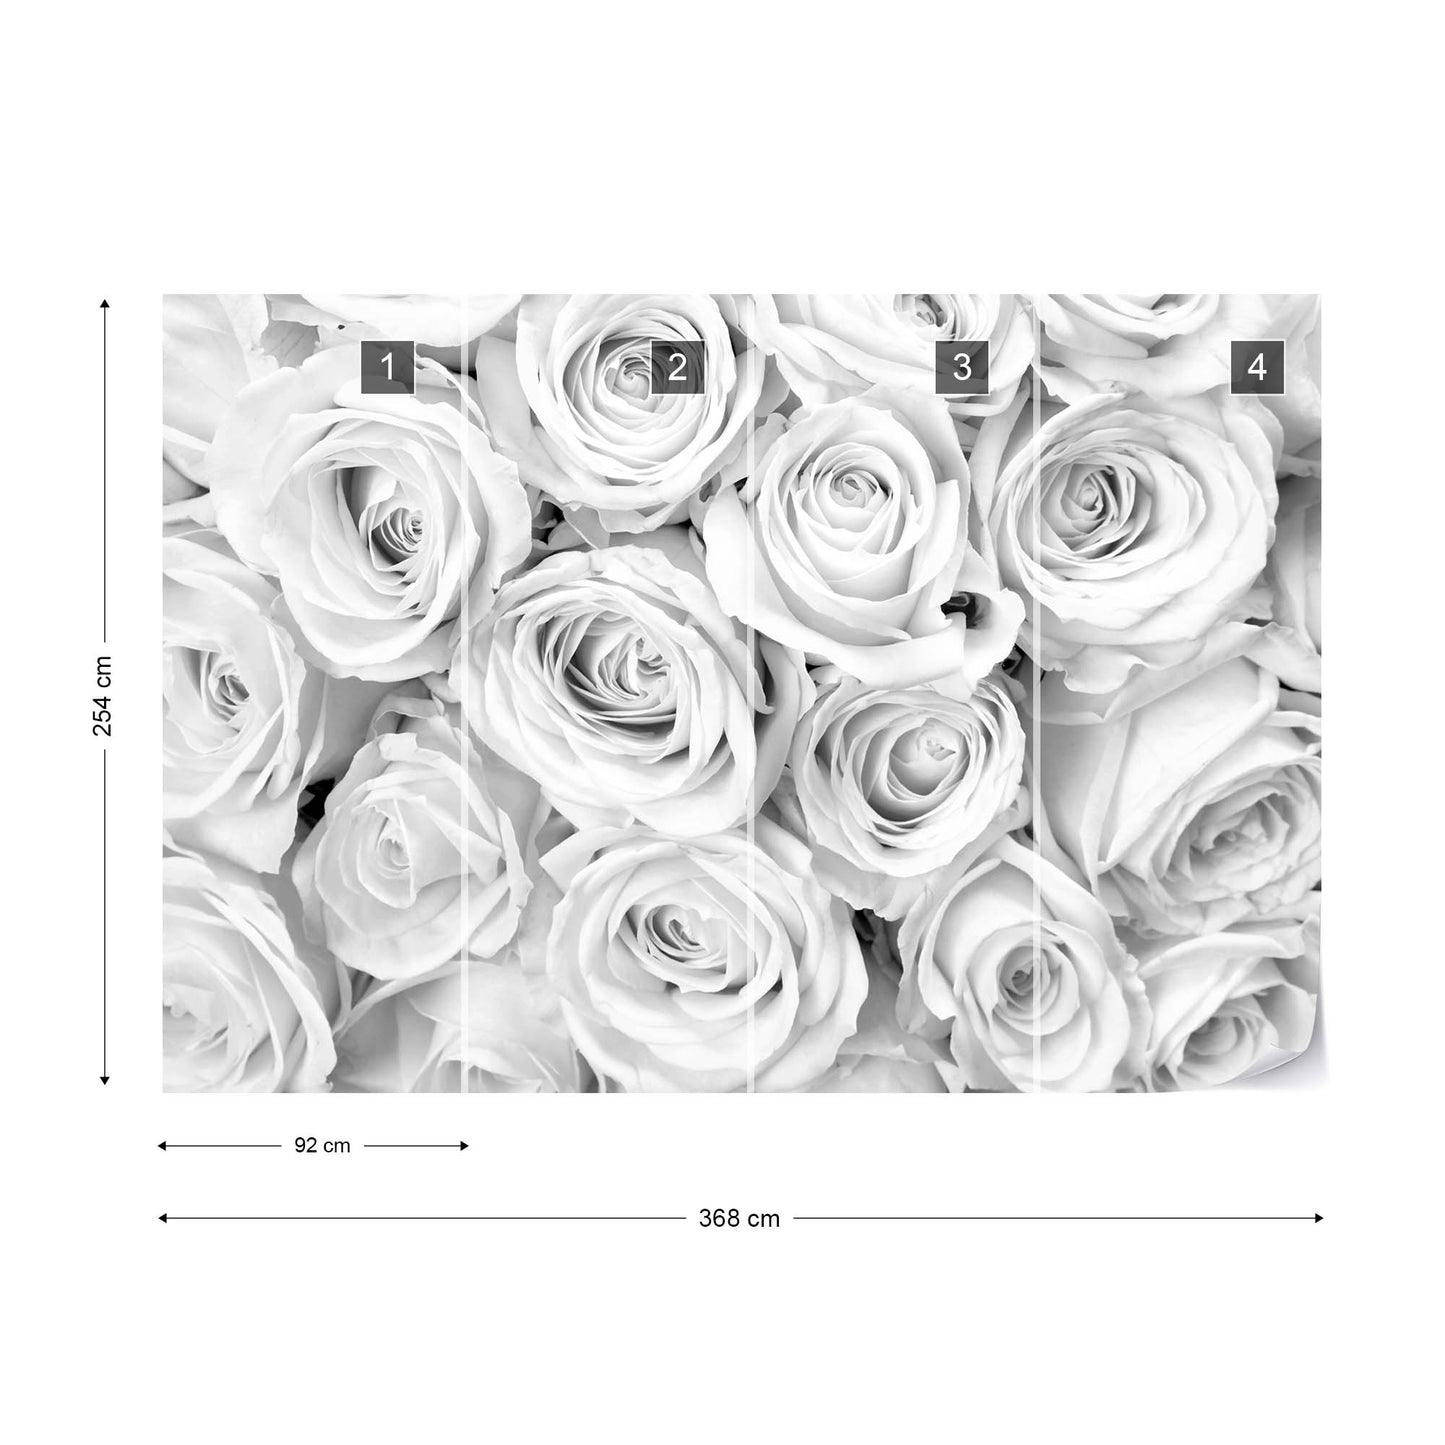 Rose Bouquet Black and White Wallpaper Waterproof for Rooms Bathroom Kitchen - USTAD HOME